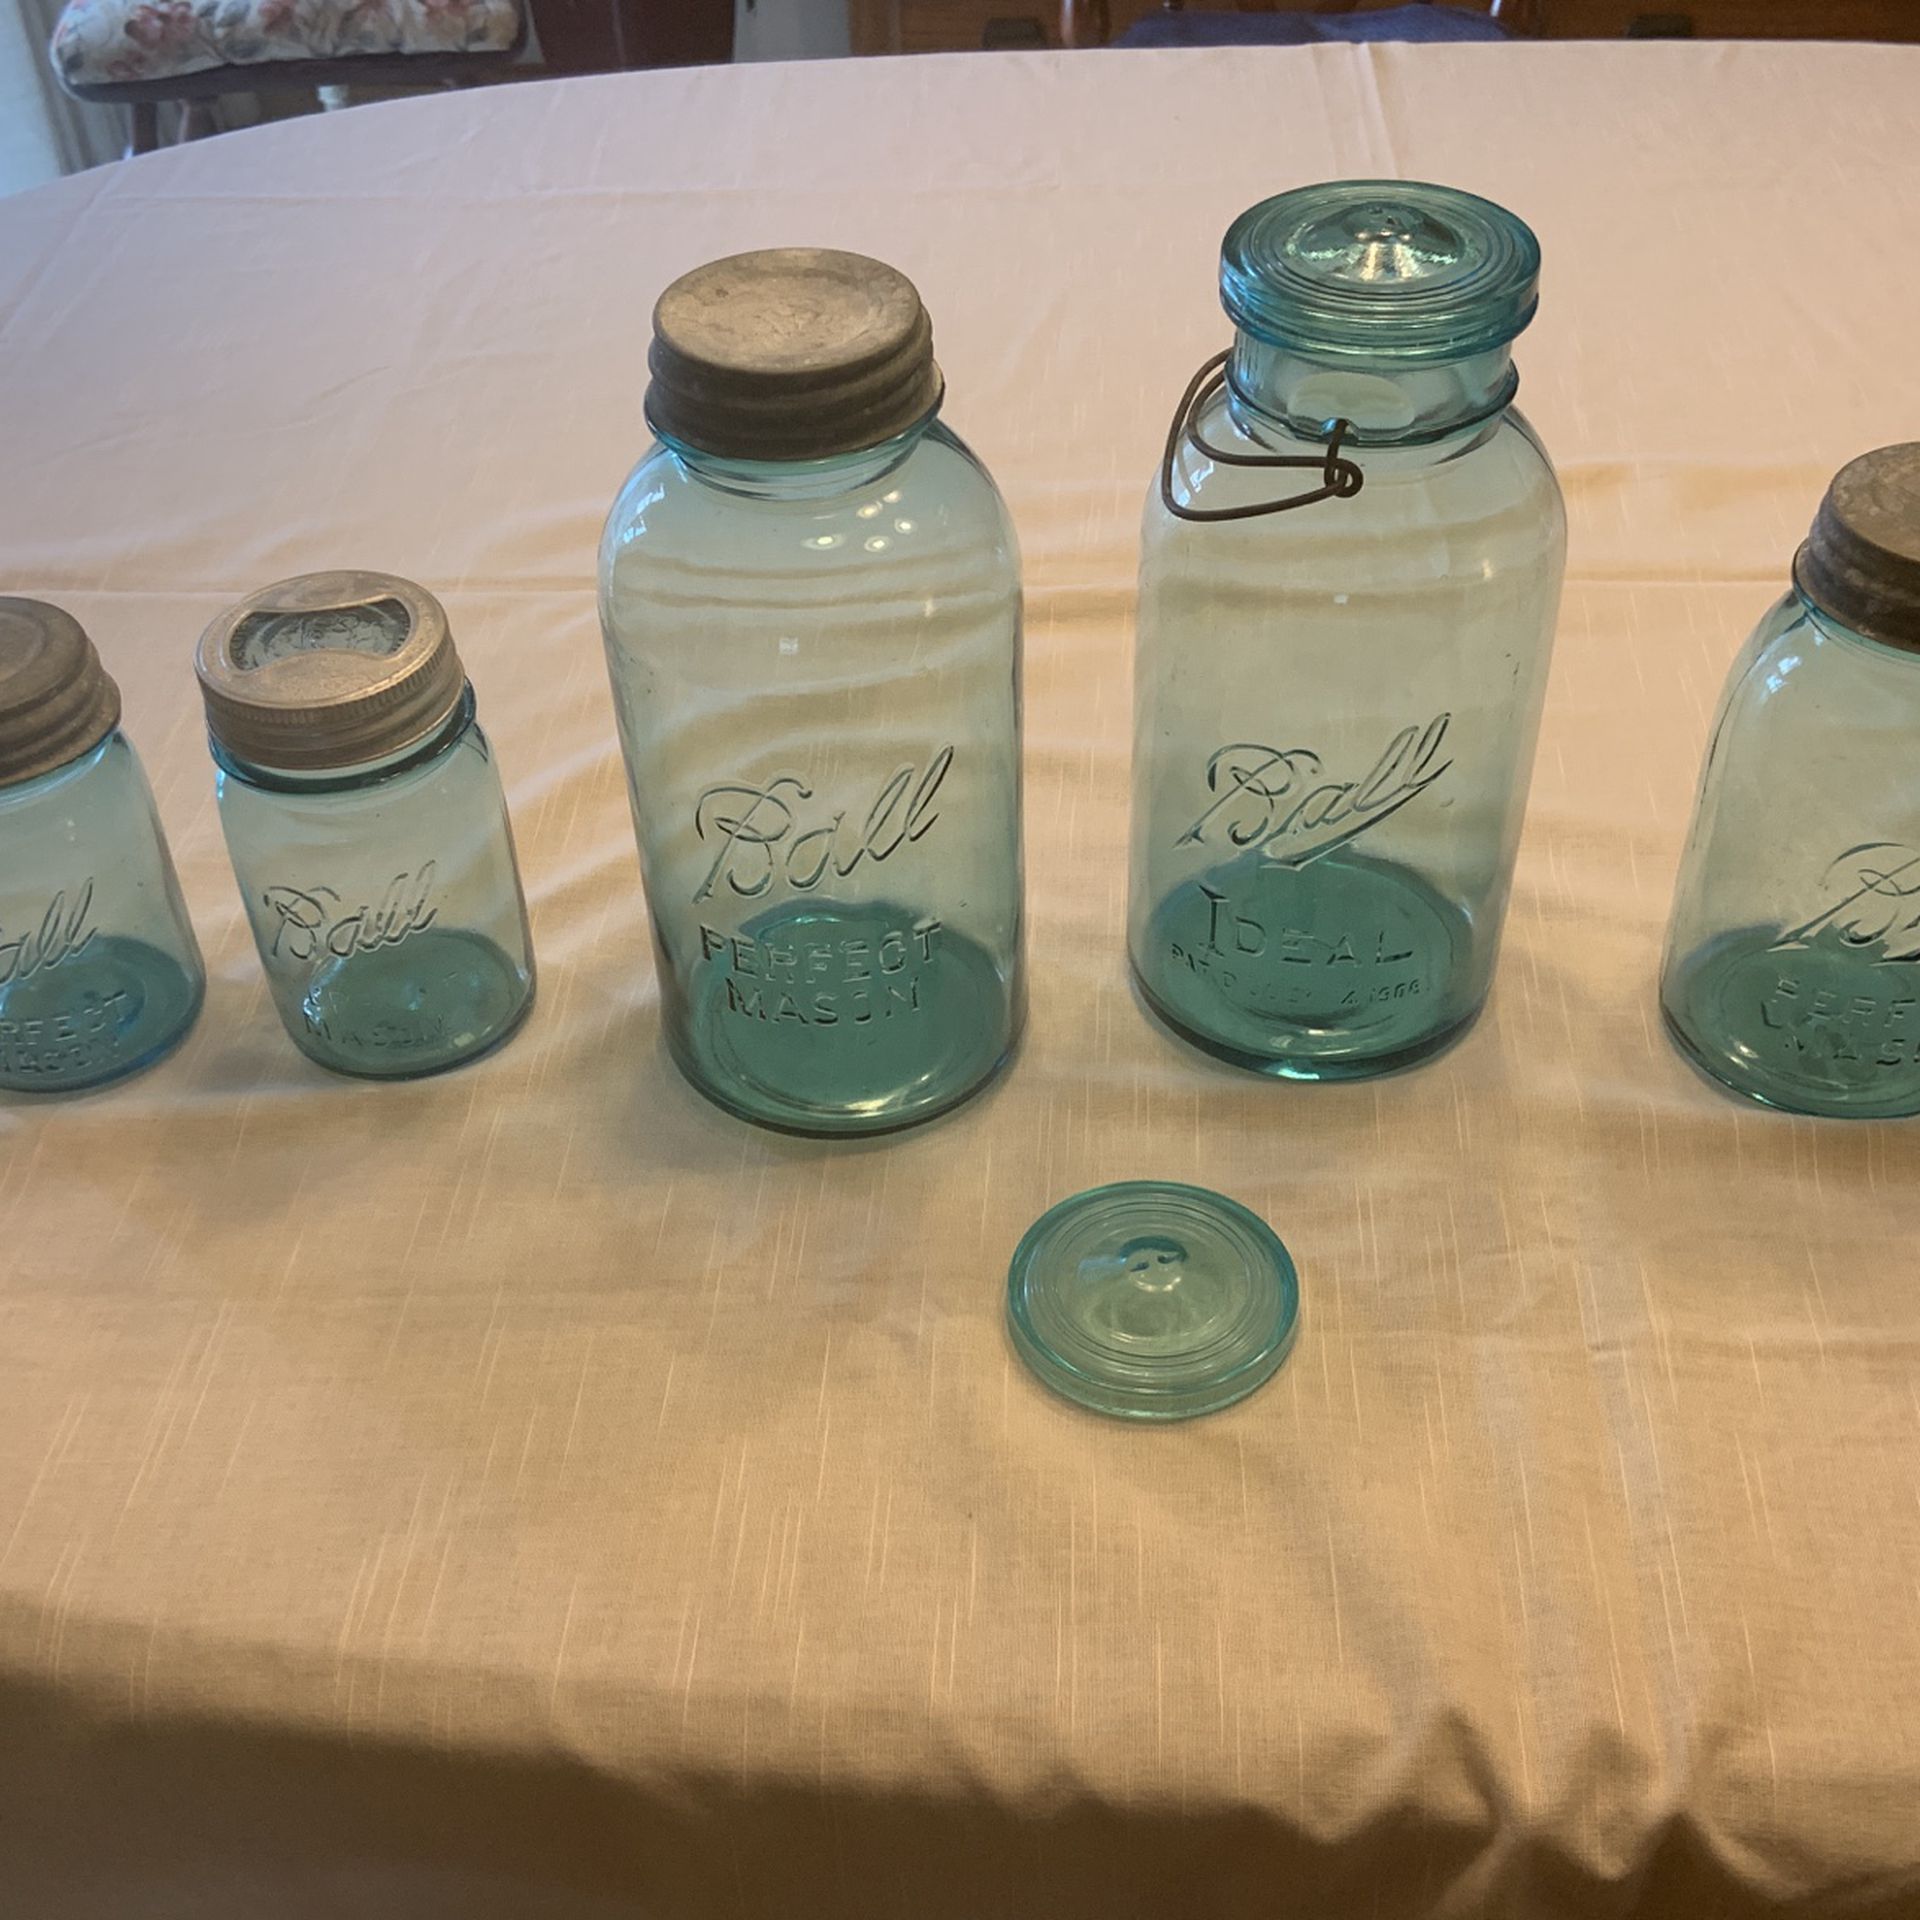 Ball Jars And Mason’s Jar With Old Lids